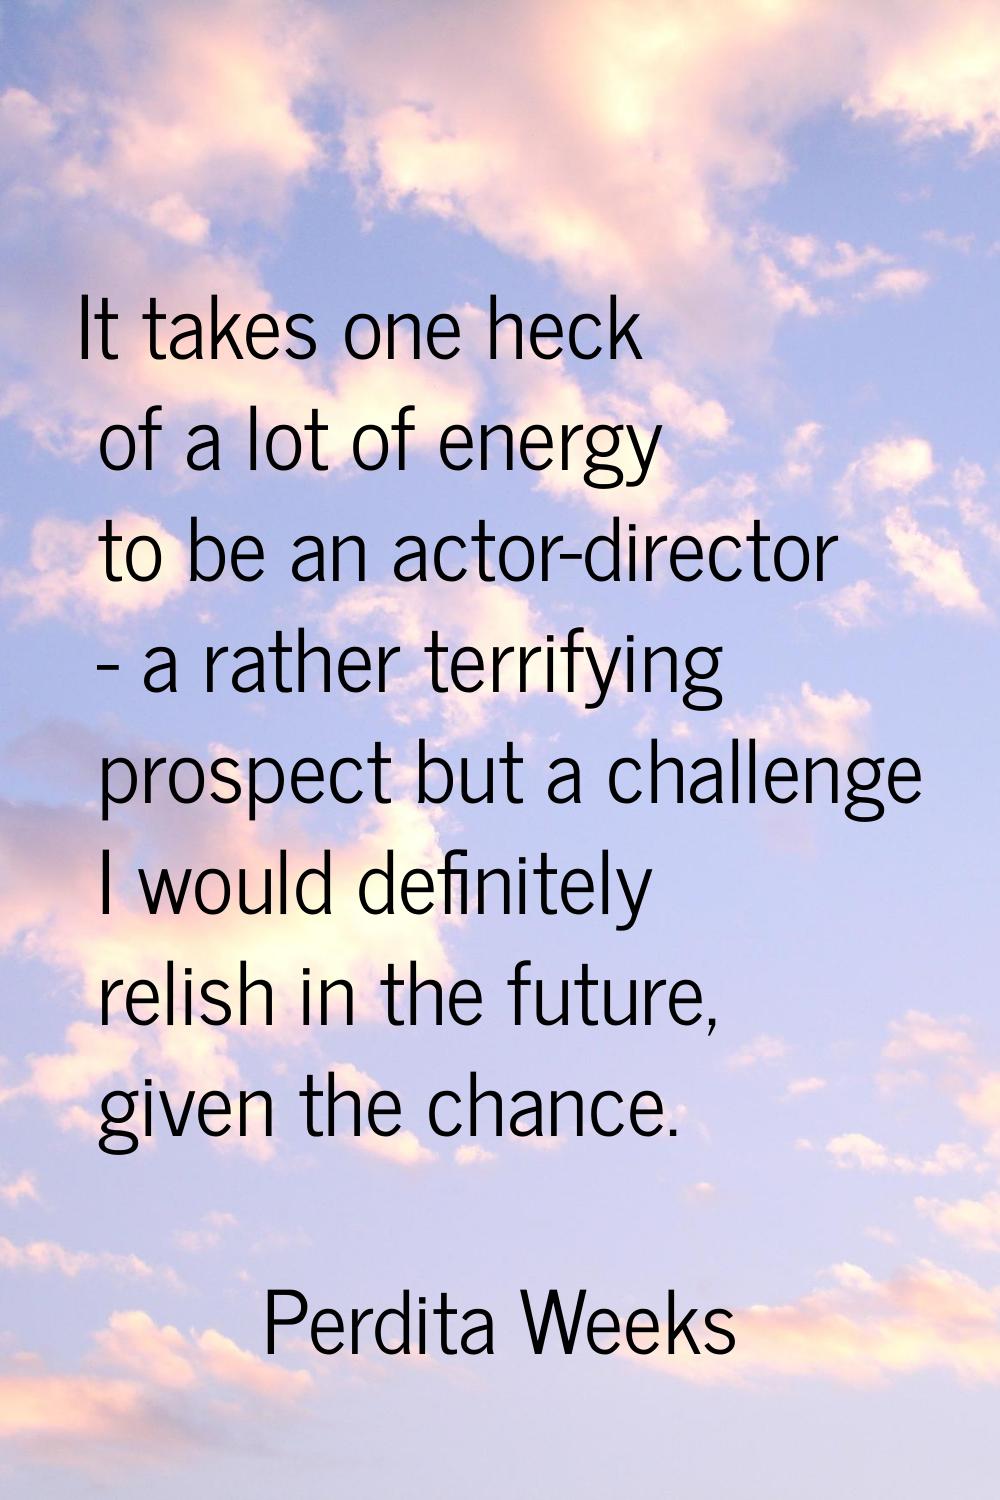 It takes one heck of a lot of energy to be an actor-director - a rather terrifying prospect but a c